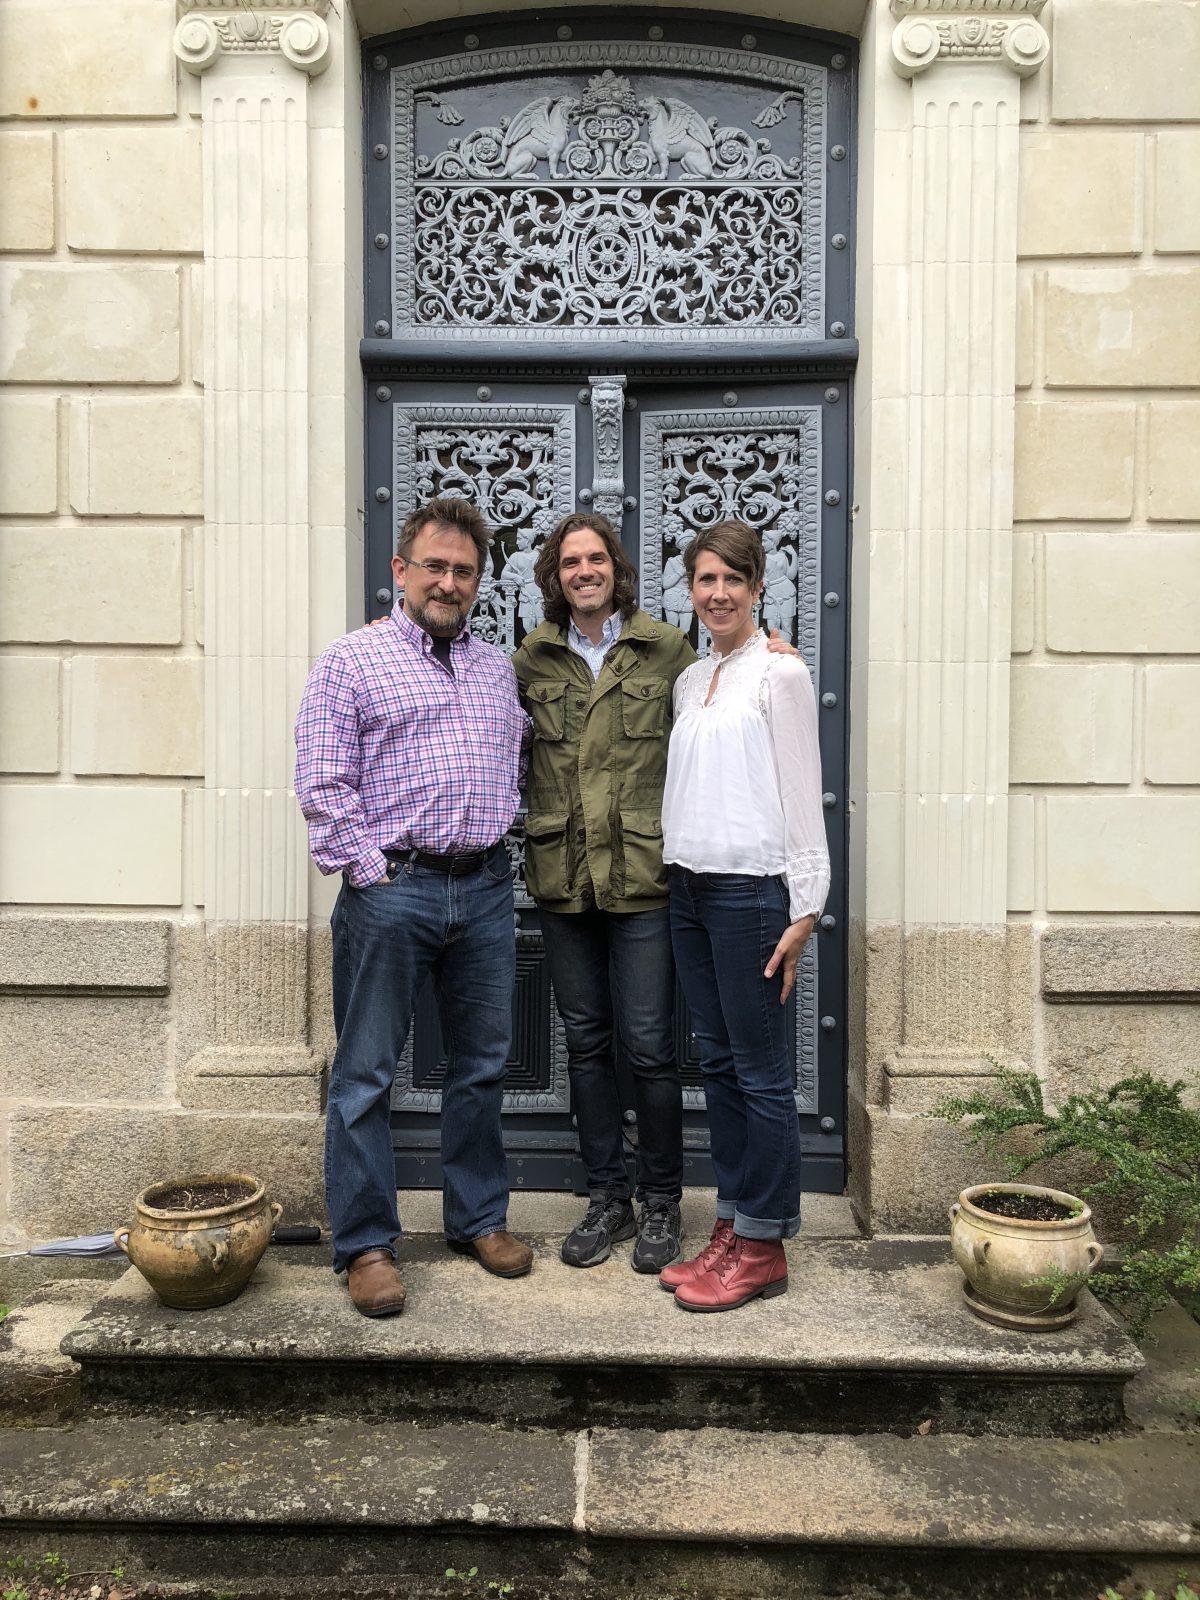 (L–R) Timothy Stotz, M. Tobias Hall, and Nicole Michelle Tully at Studio Escalier in Argenton-Chateau, France, in June 2018. (Shan Peng)